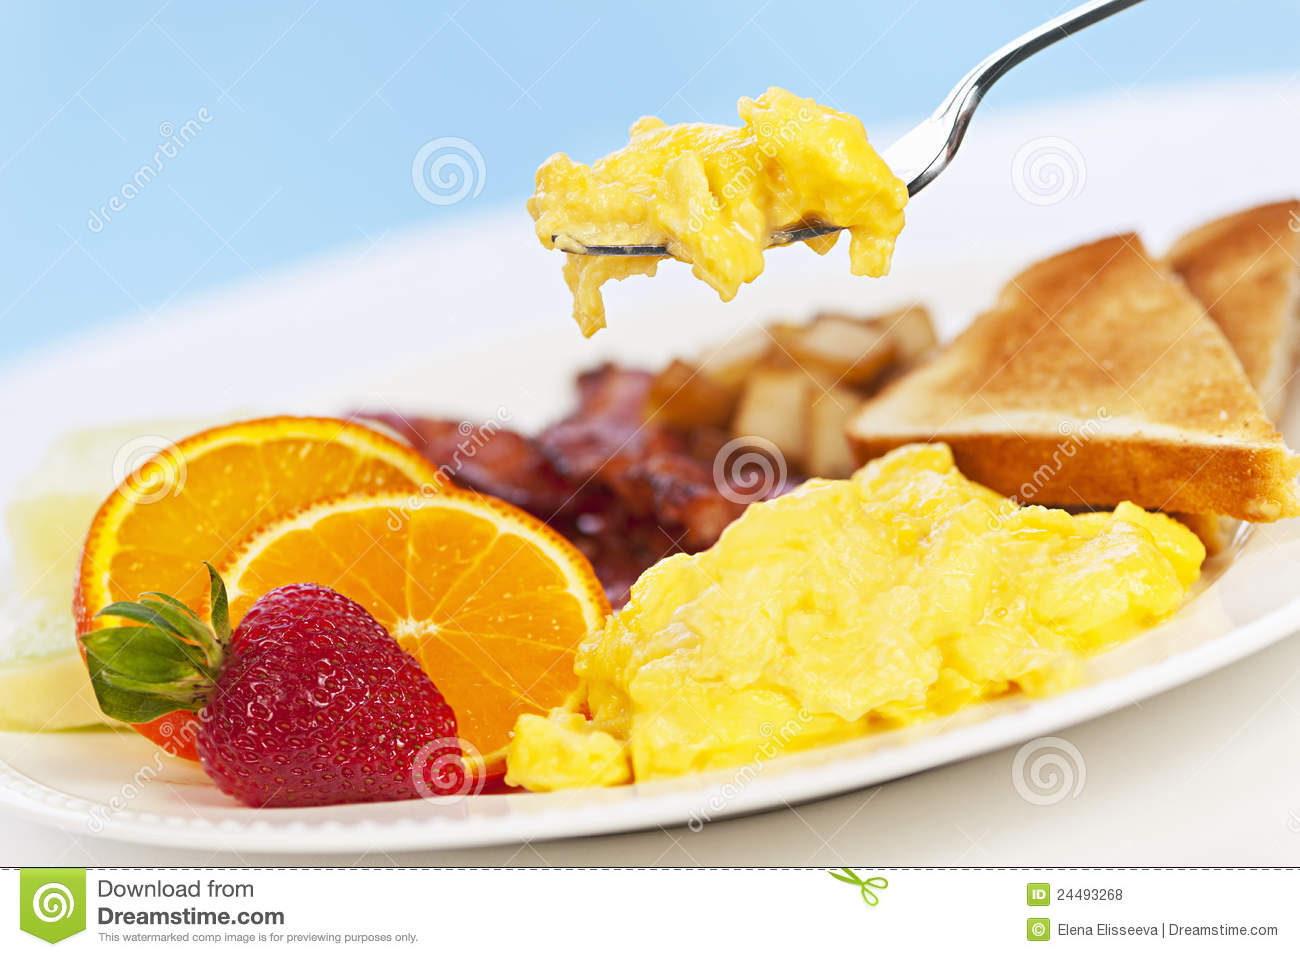 Breakfast Plate With Fork Royalty Free Stock Photos   Image  24493268